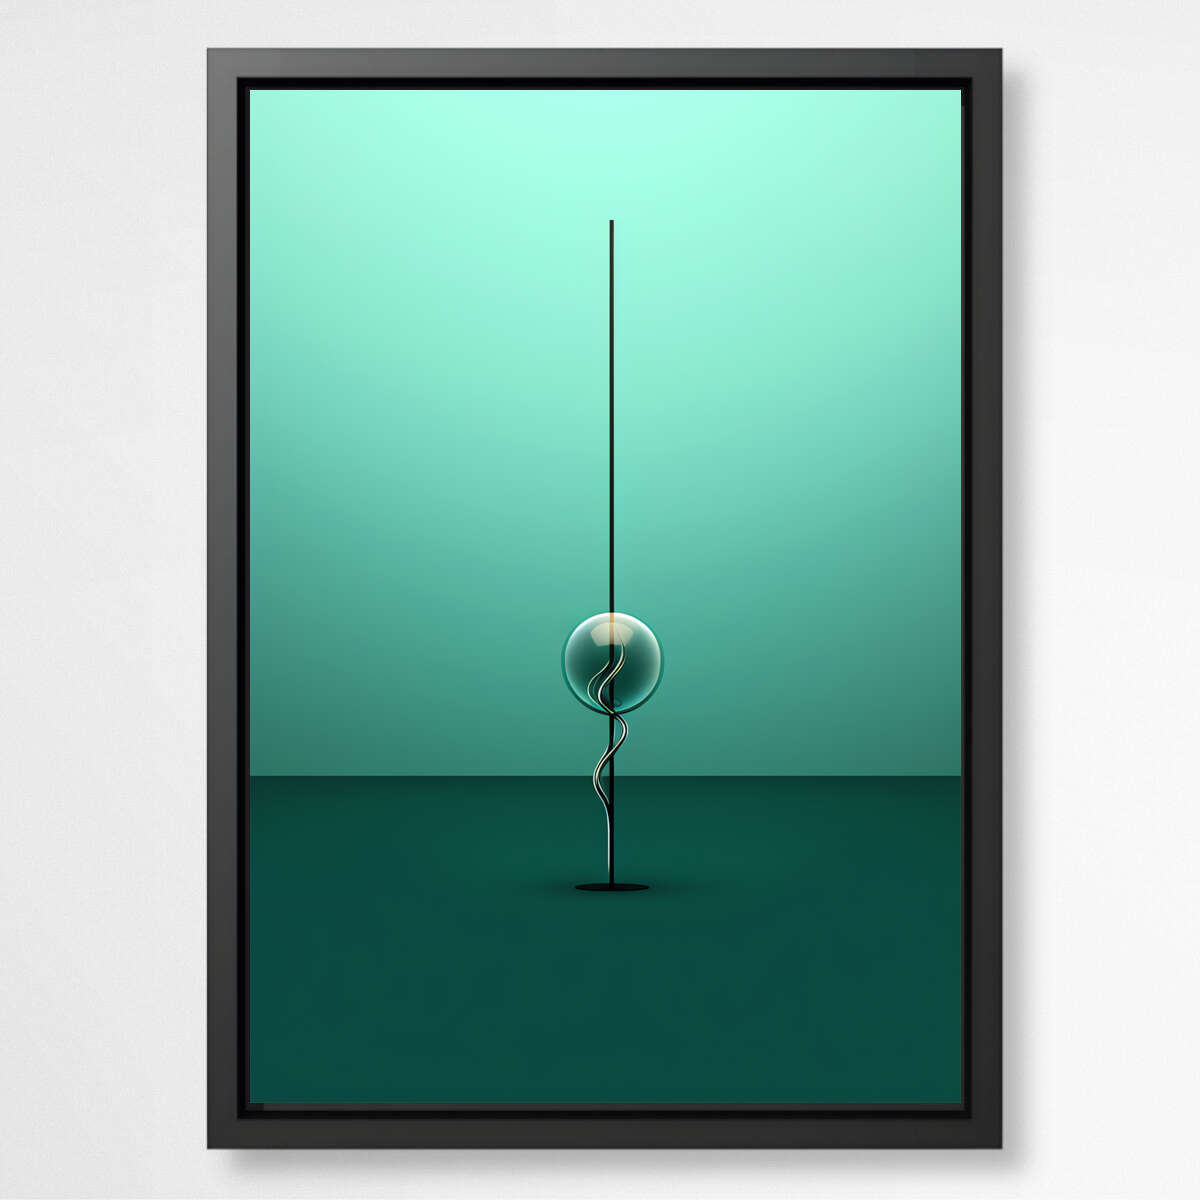 Balance and Contrast | Minimalist Wall Art Prints - The Canvas Hive